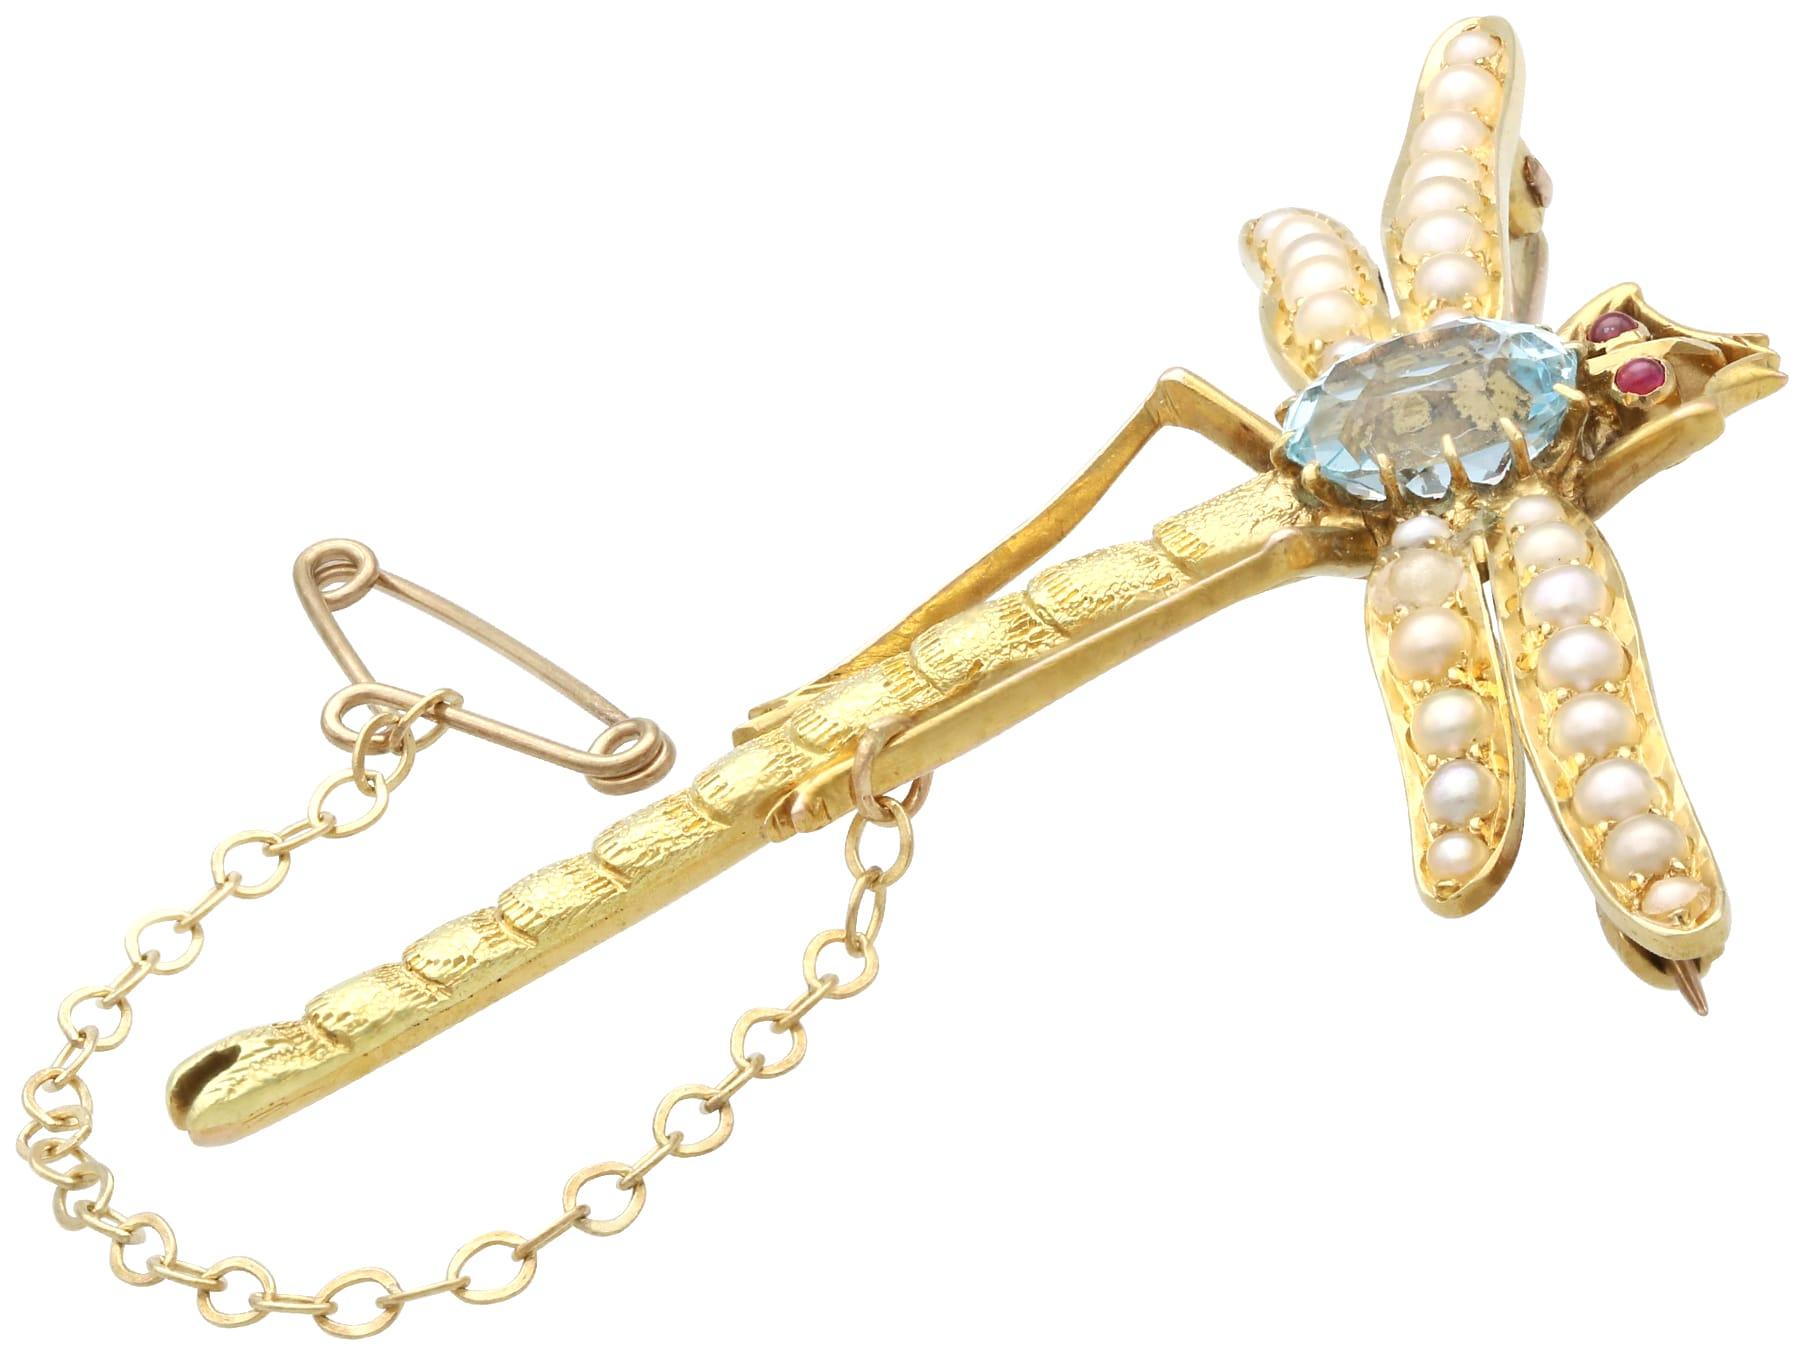 Antique 0.87 Carat Aquamarine Ruby and Pearl Yellow Gold Dragonfly Brooch In Excellent Condition For Sale In Jesmond, Newcastle Upon Tyne